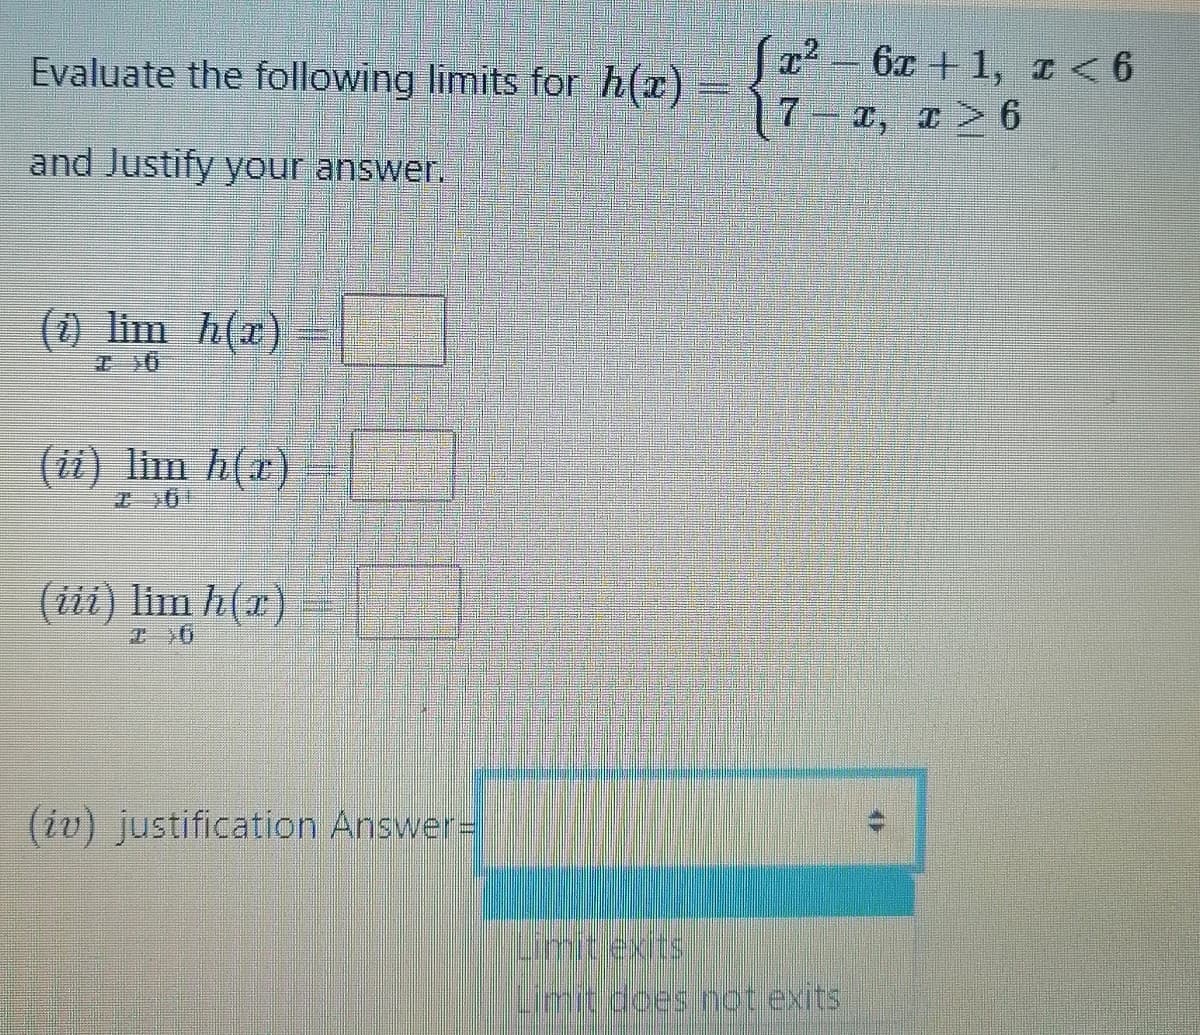 Evaluate the following limits for h(x)
6x + 1, I <
7.
T, T 6
and Justify your answer.
() lim h(x)
(1i) lim h(r)
(iii) lim h(r)
エ1O
(iv) justification Answer%D
Limitlexits
Limit does not exits
